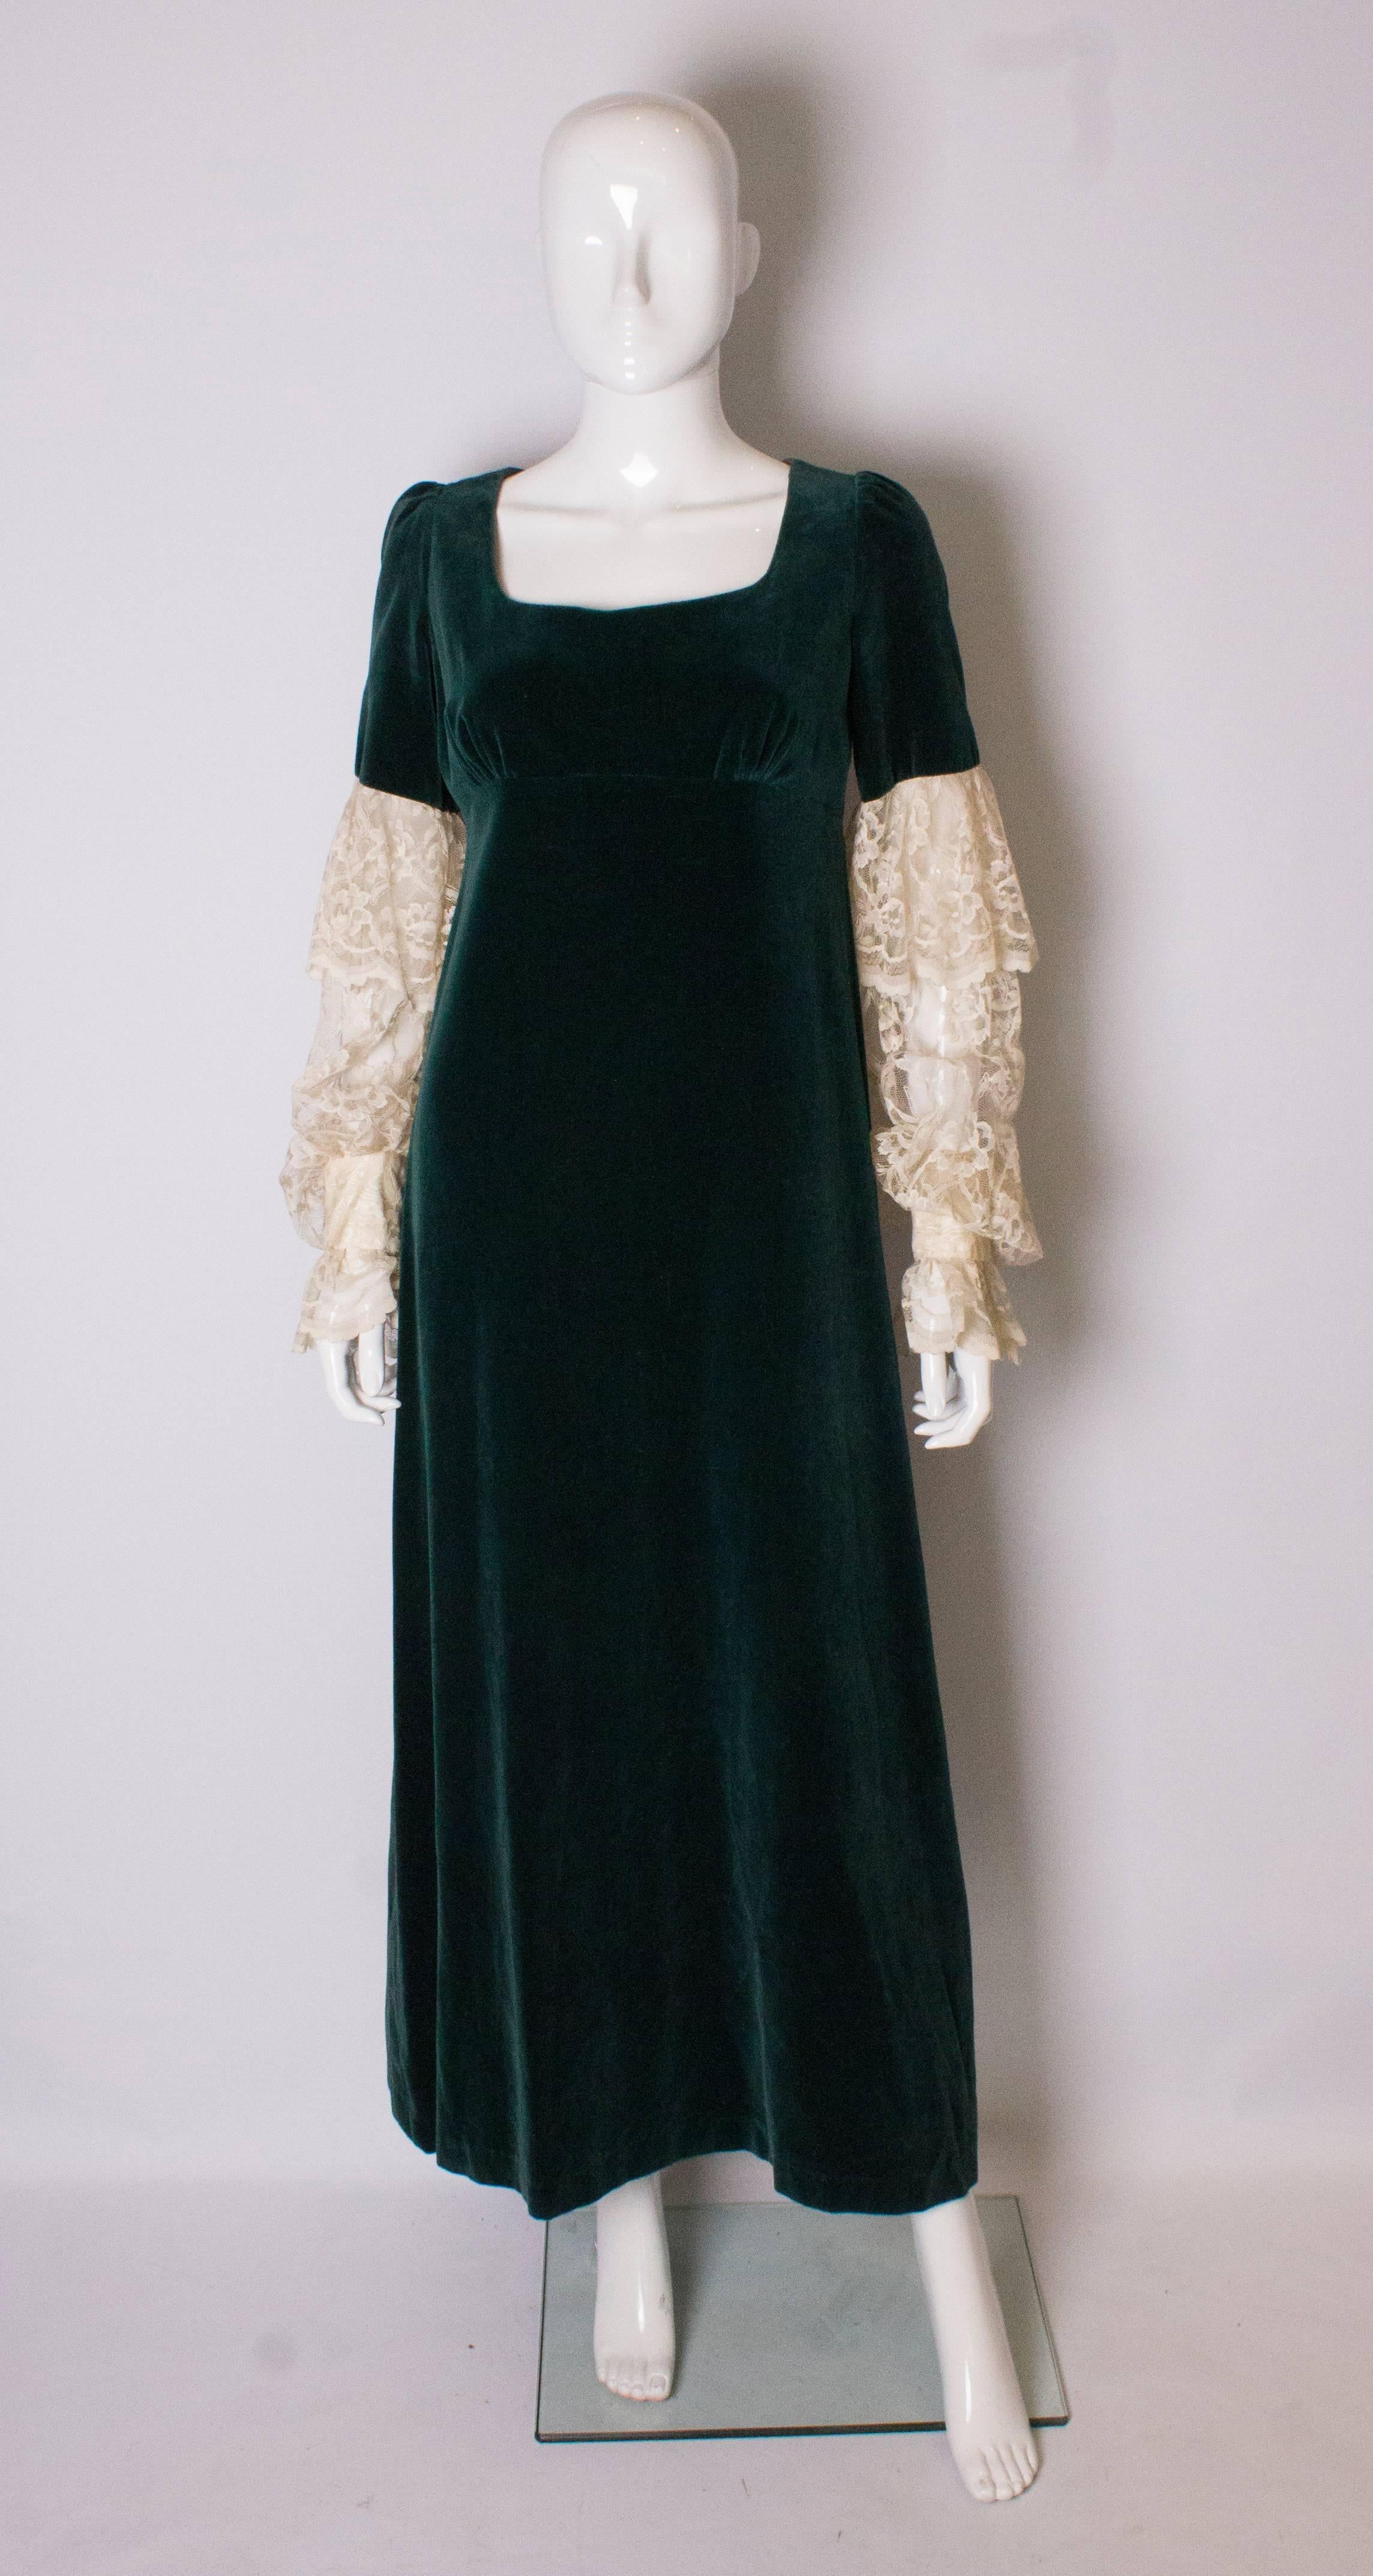 A great gown by Quad.  The body of the dress is in  with a low scoop neck, and short sleeves. The rest of the sleeves are white lace with 2 popper cuffs.The dress is fully lined.